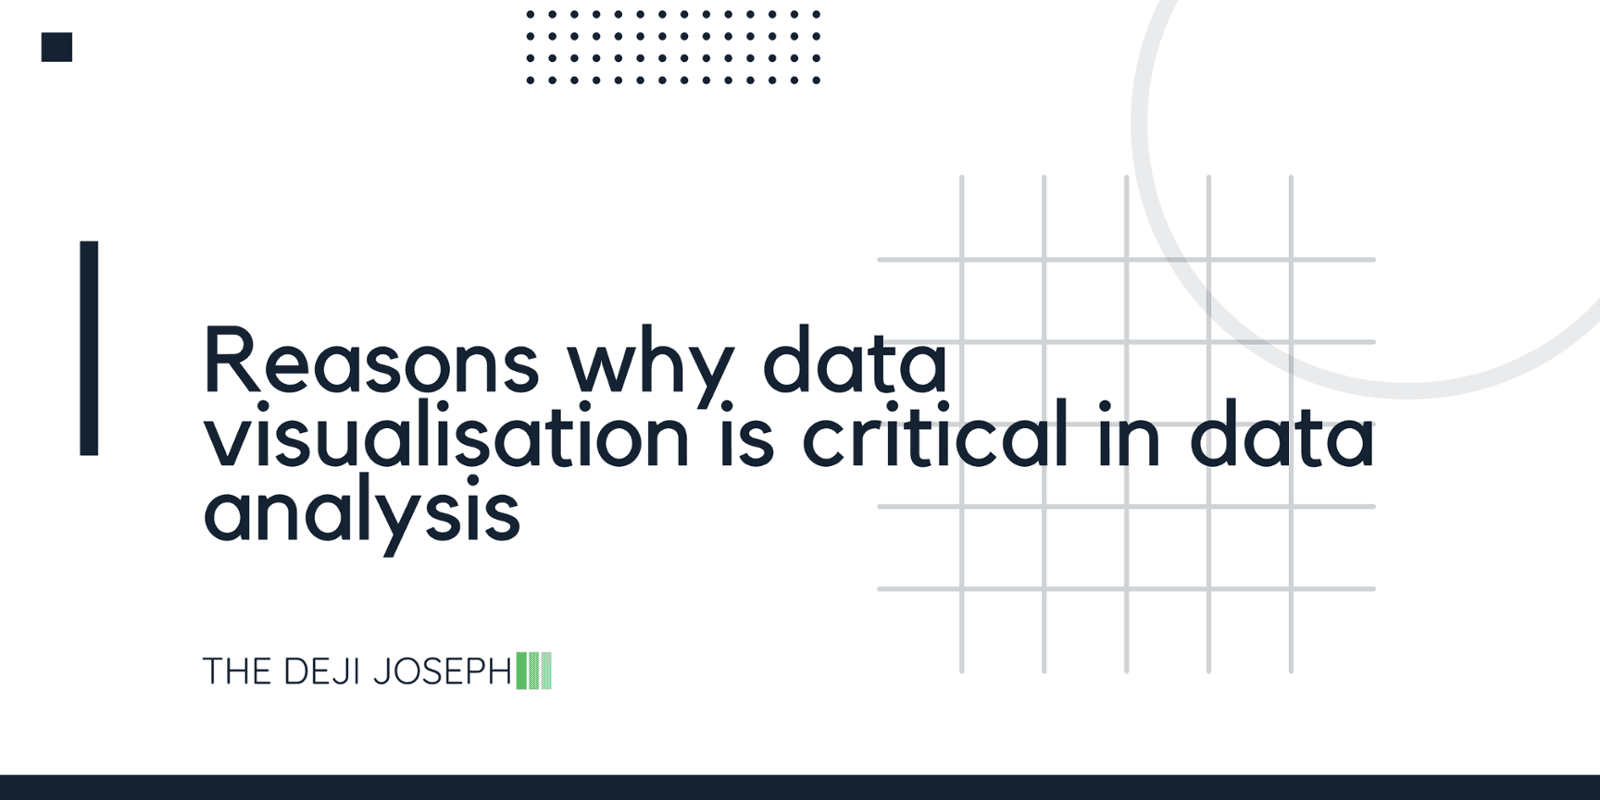 Reasons why data visualisation is critical in data analysis